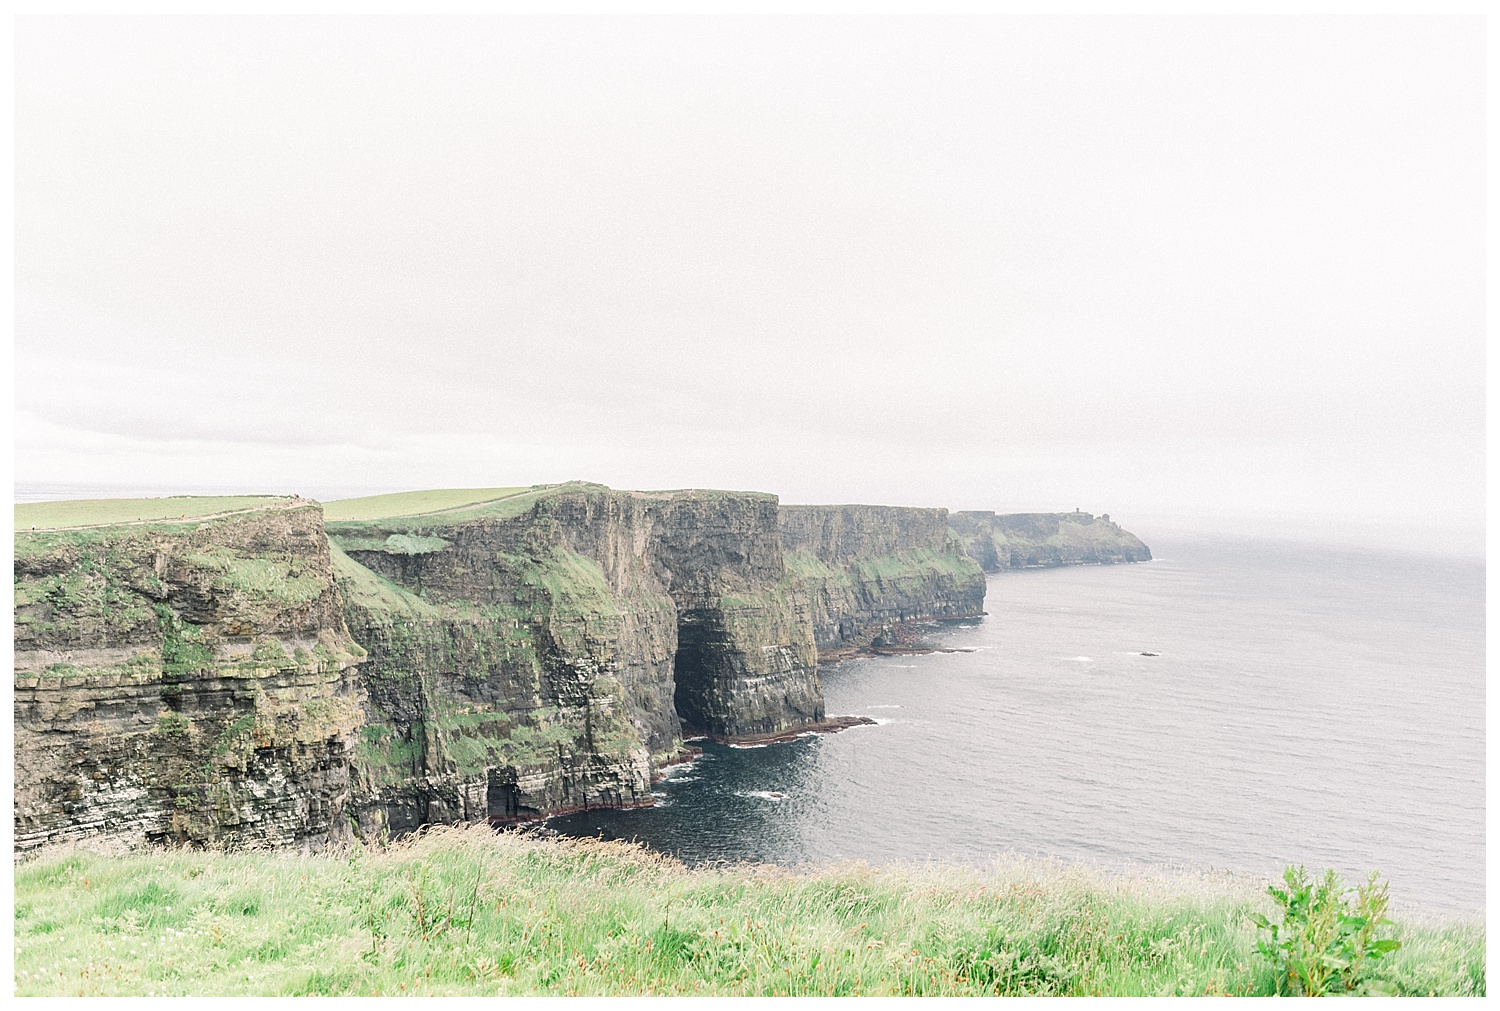 Photo of the Cliffs of Moher in Ireland